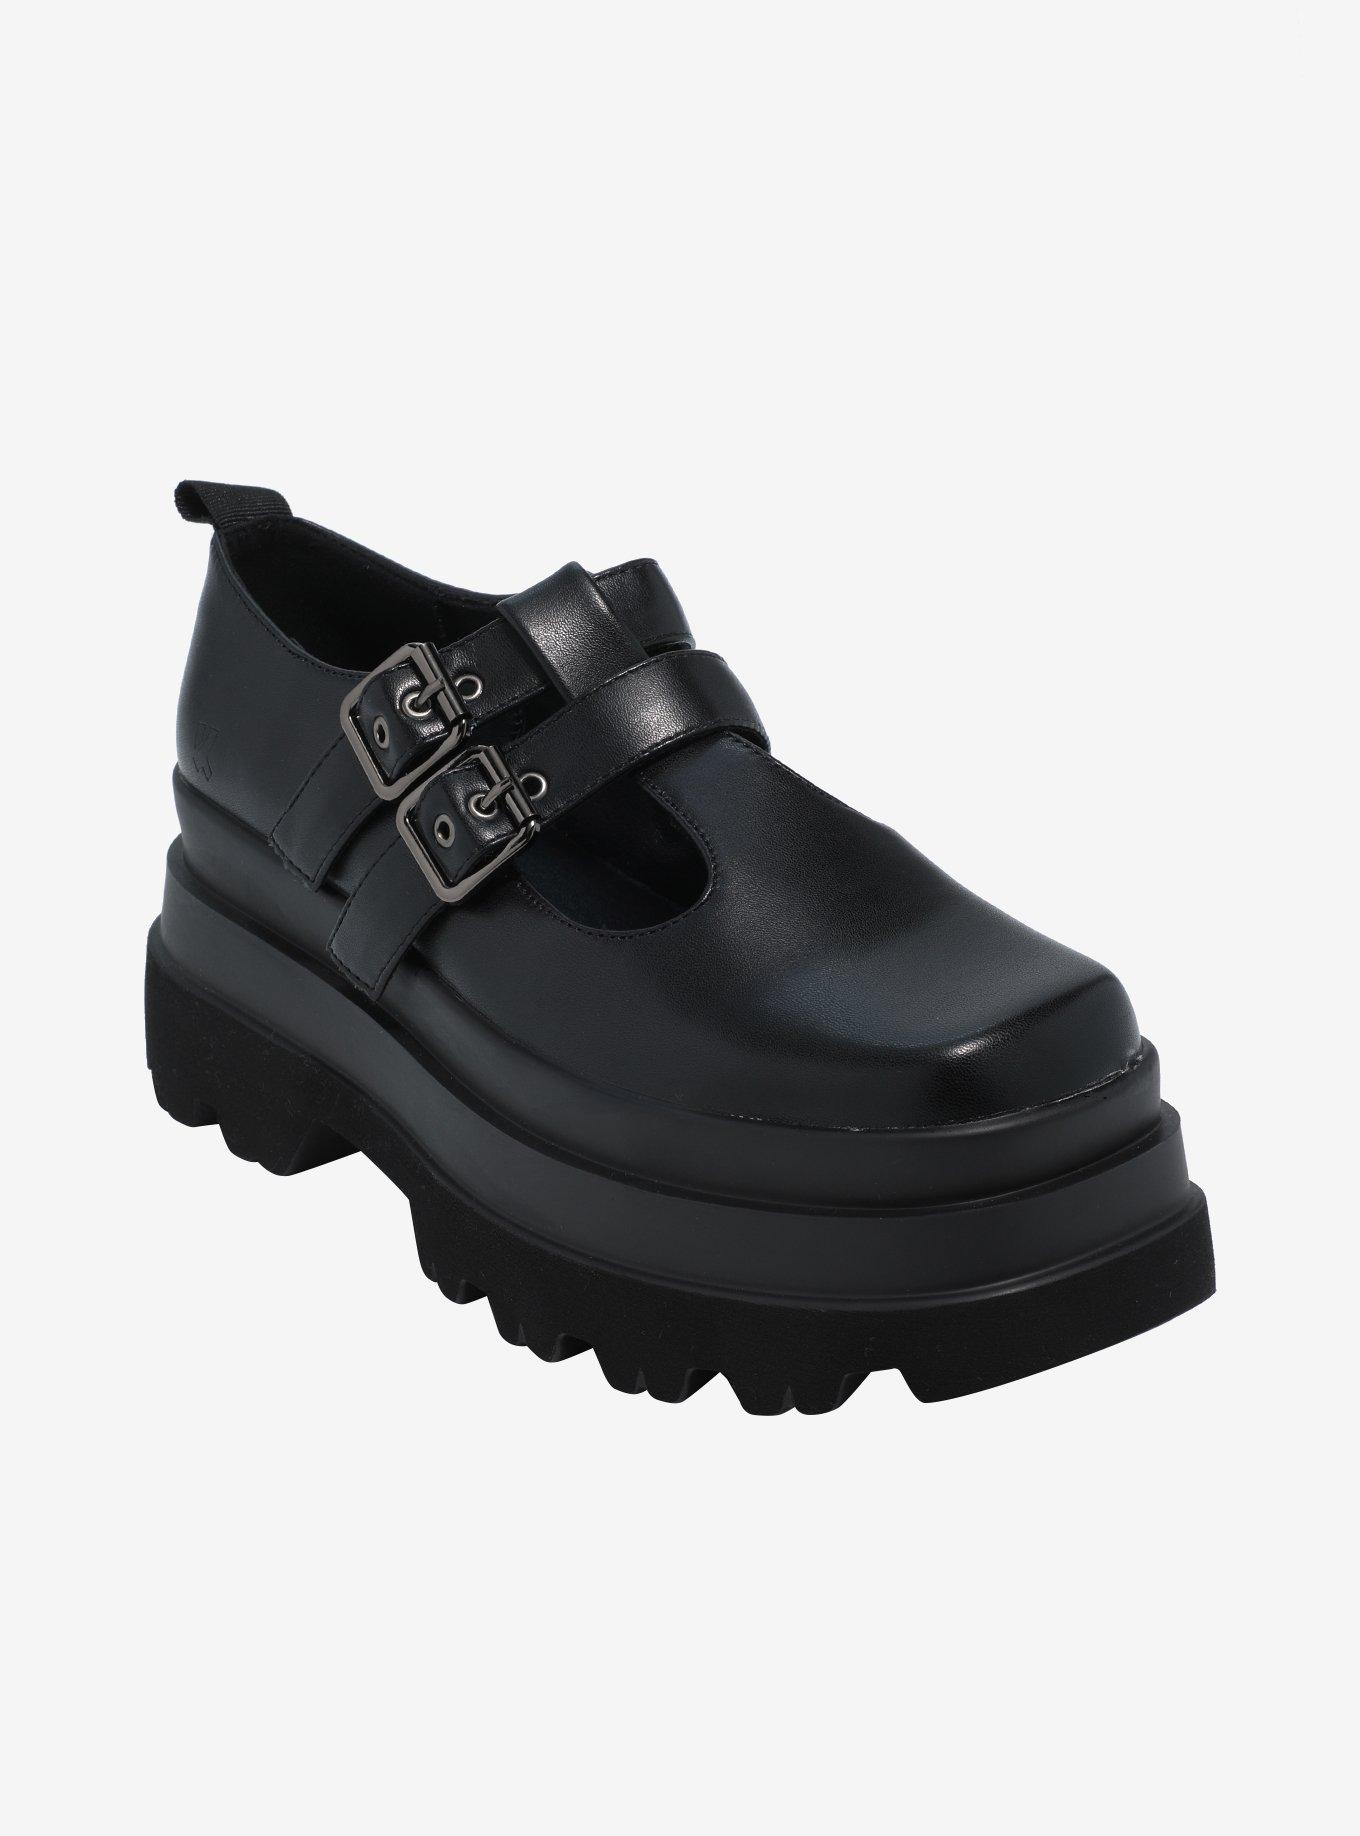 Koi Black Double Buckle Strap Mary Janes, , hi-res